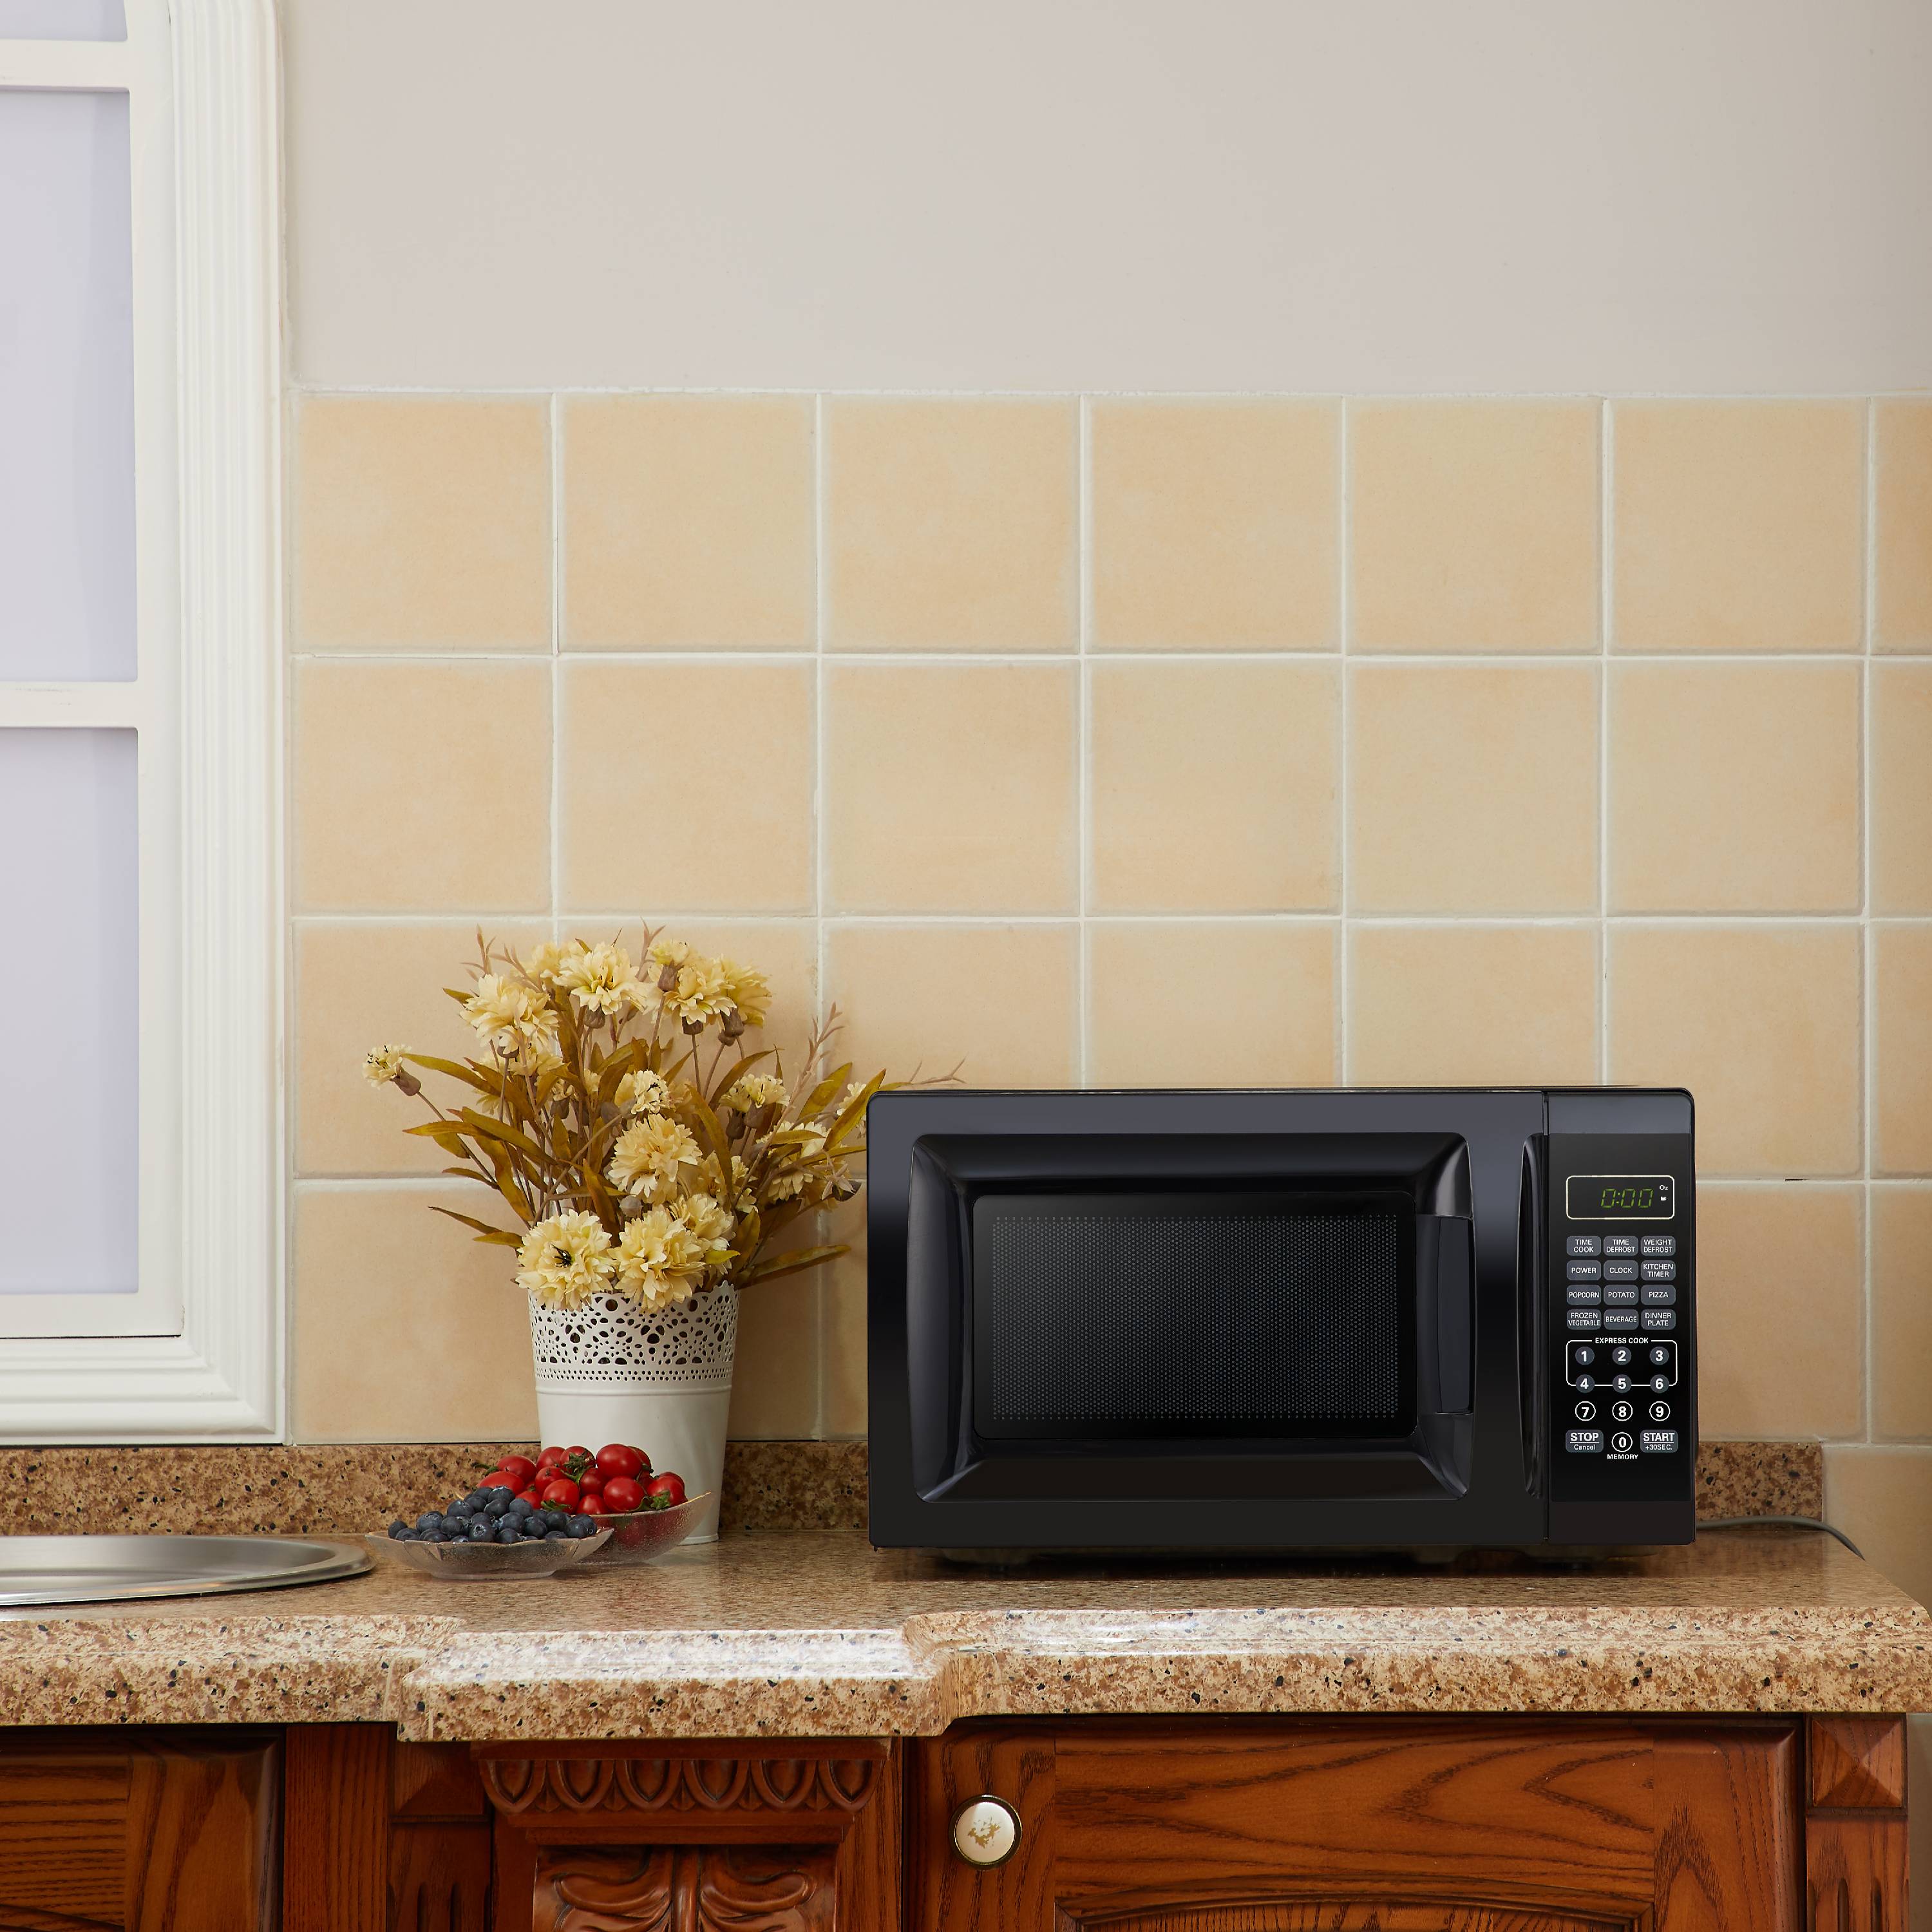 Mainstays 0.7 Cu. Ft. 700W Black Microwave Oven - image 4 of 8